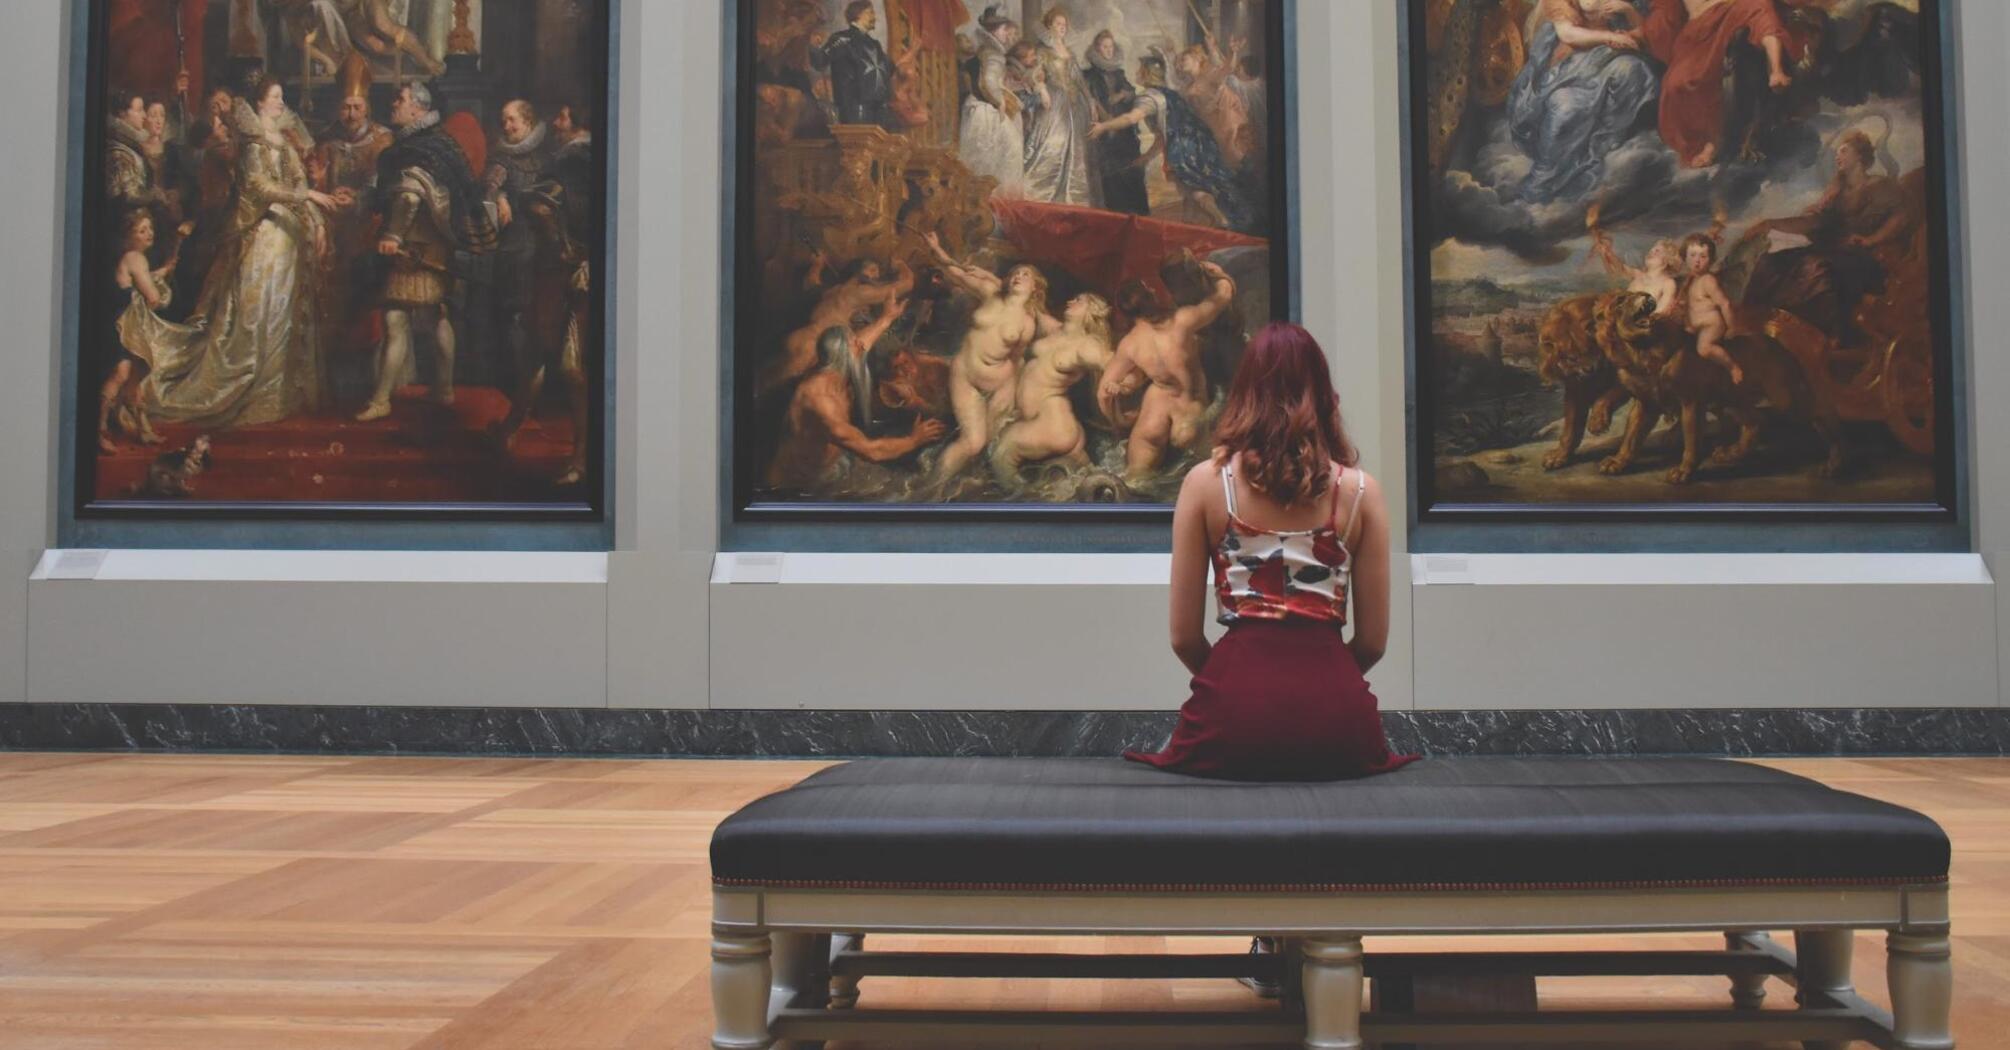 The girl looks at the three paintings of the painting